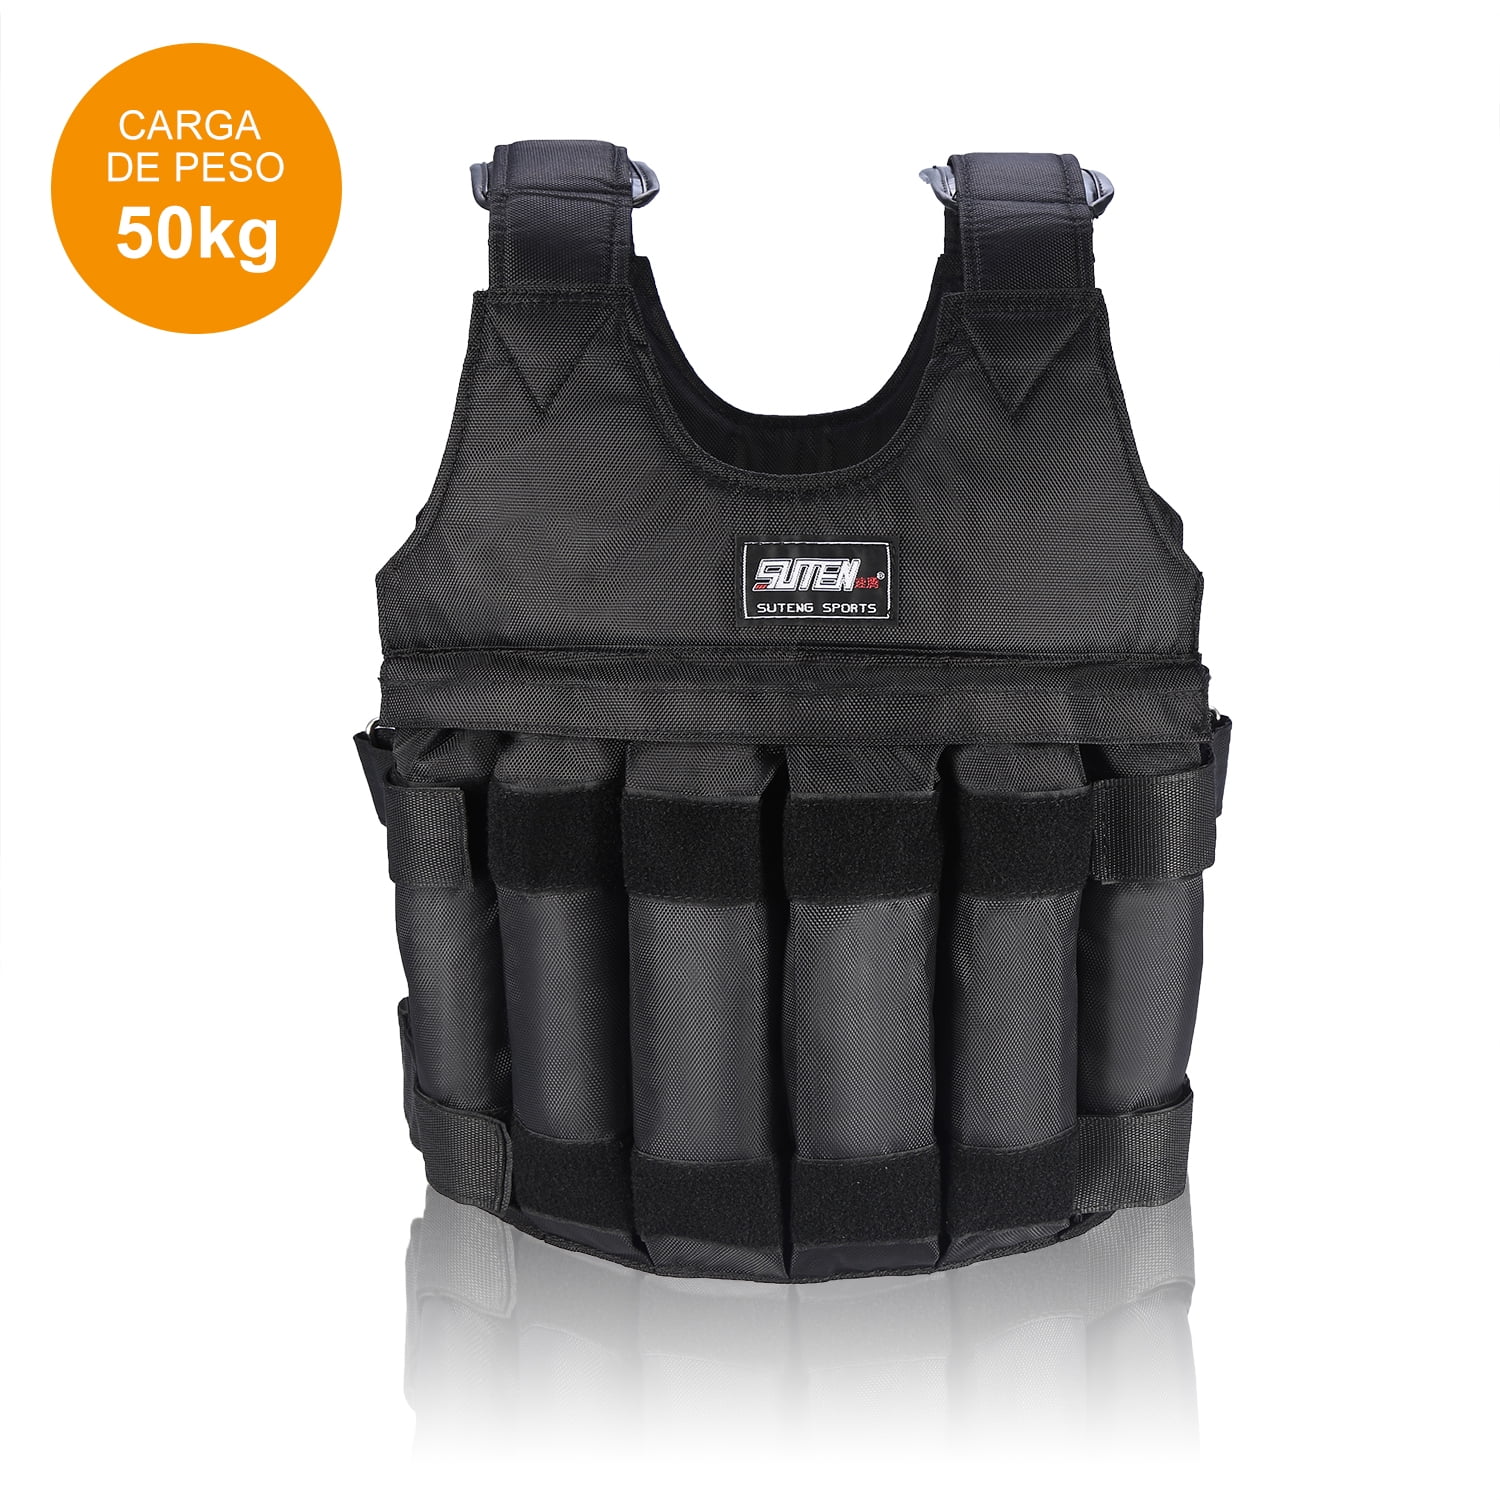 20KG Adjustable Workout Weighted Vest Exercise Strength Training Fitness